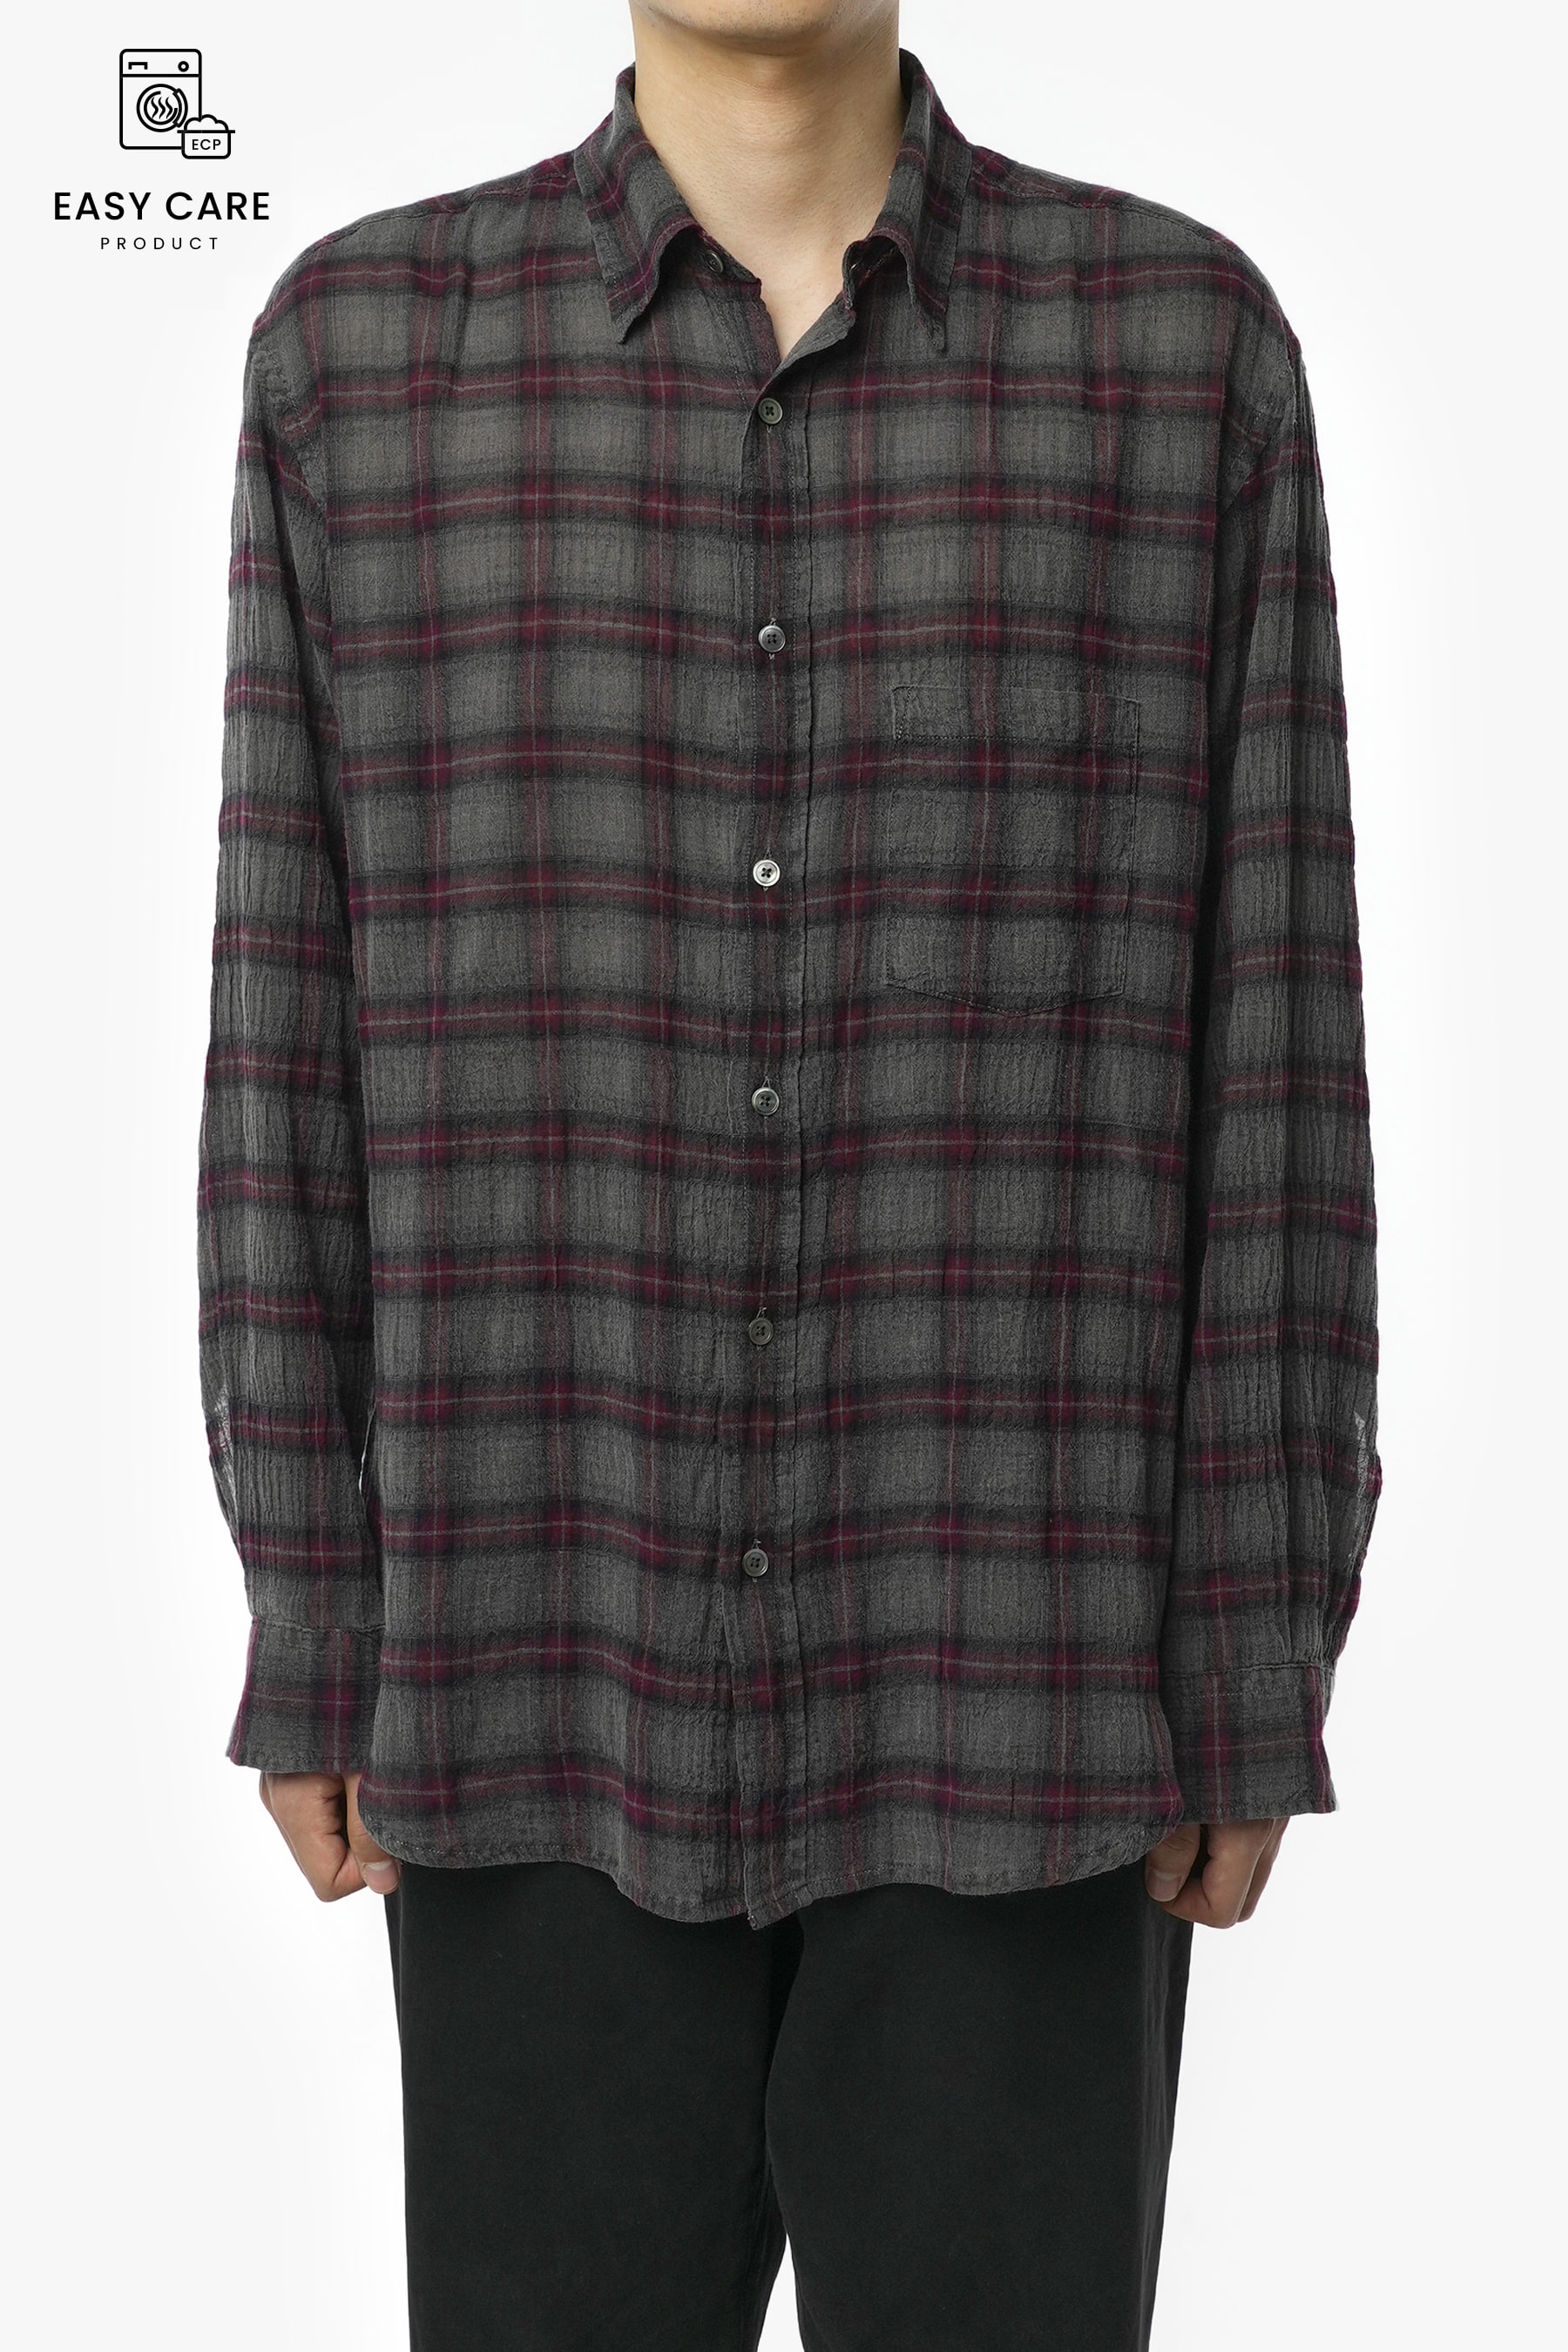 DUSTY BLACK RED DIRTY WASHED CLASSIC FIT CHECK SHIRTS (ECP GARMENT PROCESS)